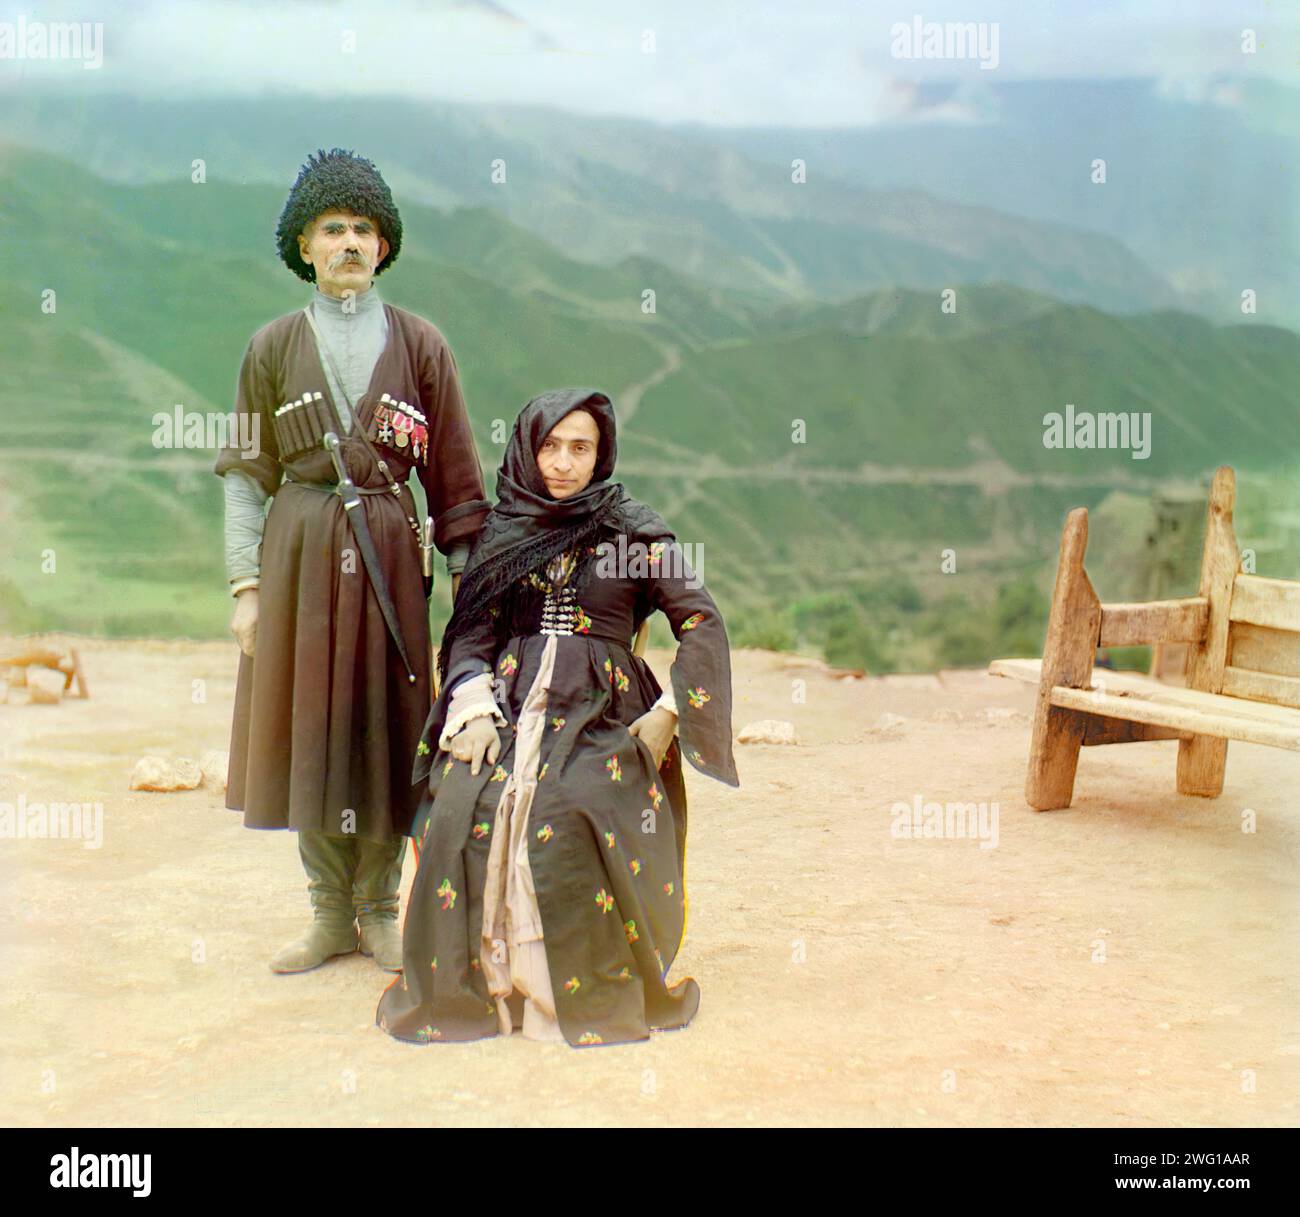 Dagestani types, between 1905 and 1915. Dagestani couple posed outdoors for a portrait. A couple in traditional dress poses for a portrait in the mountainous interior region of Gunib on the north slope of the Caucasus Mountains in what is today the Dagestan Republic of the Russian Federation. Stock Photo